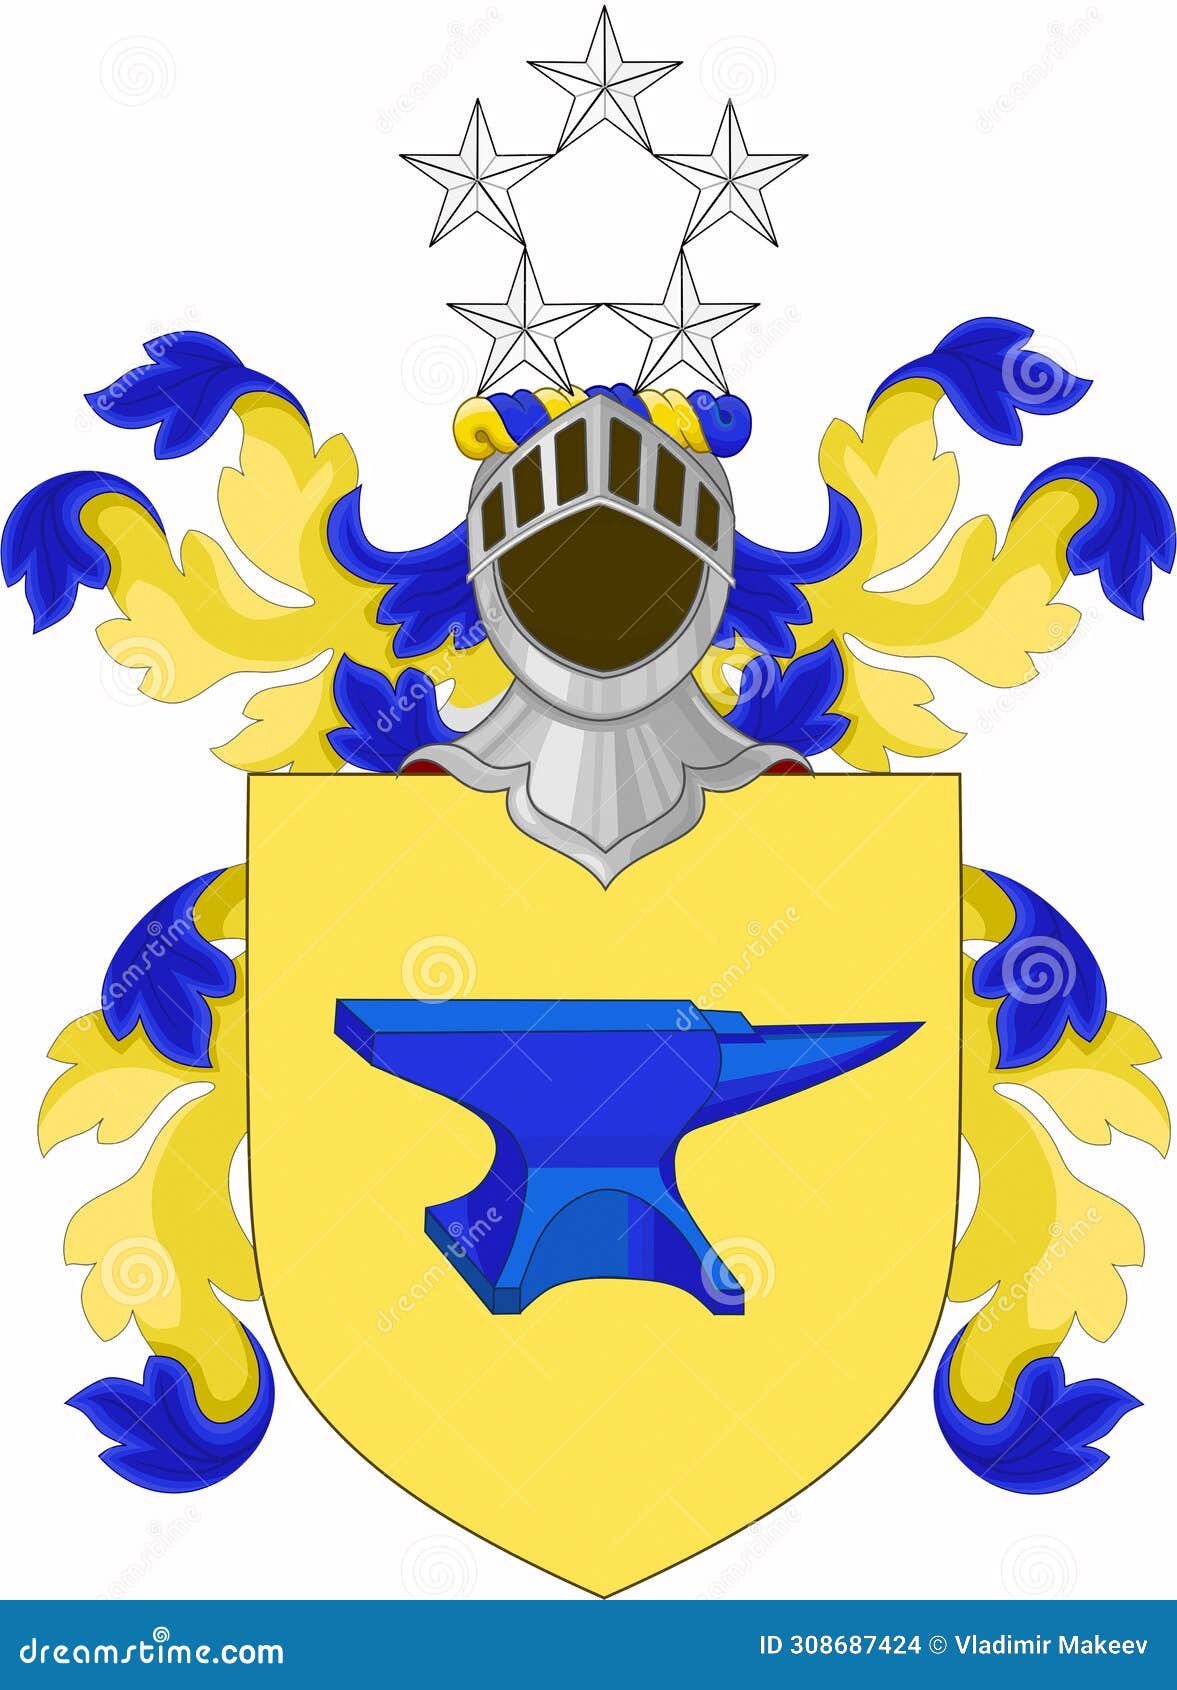 coat of arms of dwight eisenhower.